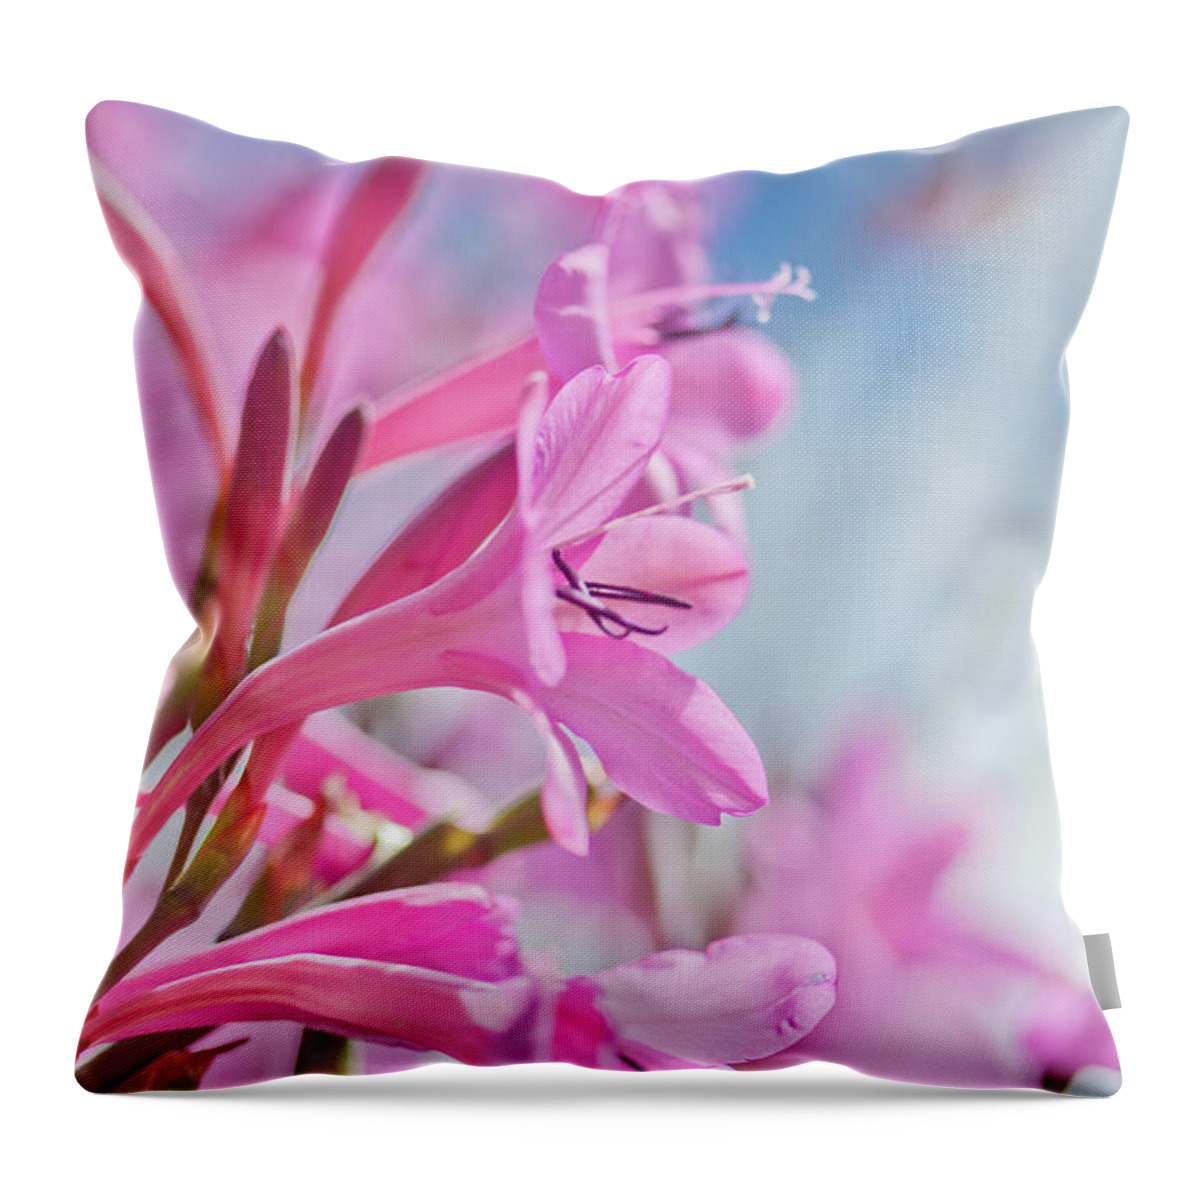 Tropical Dreams Throw Pillow featuring the photograph A Bright New Chapter Ahead by Az Jackson